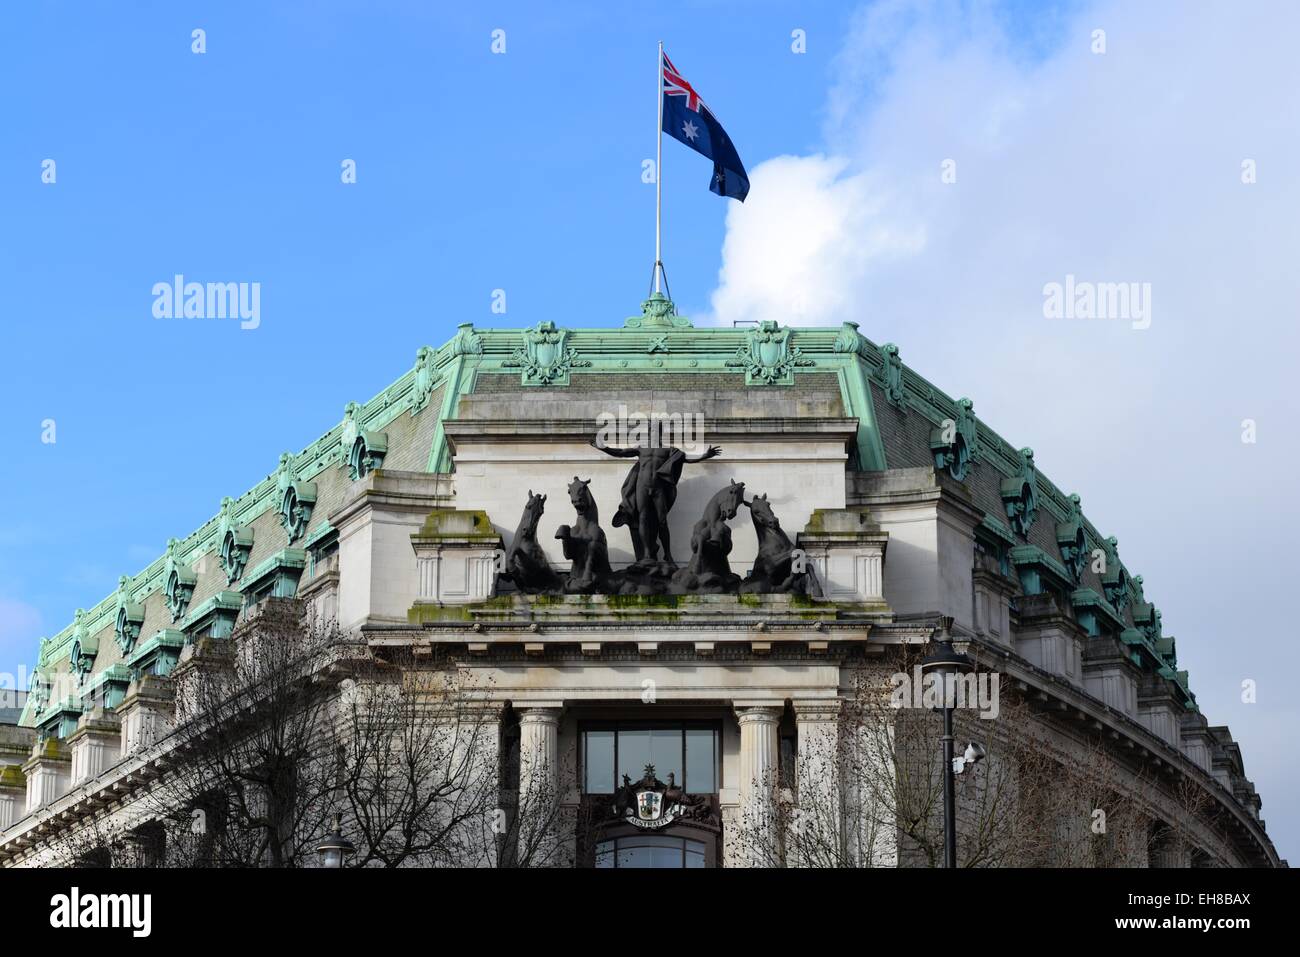 Roof and flag of the Australian building, Strand, London, Stock - Alamy